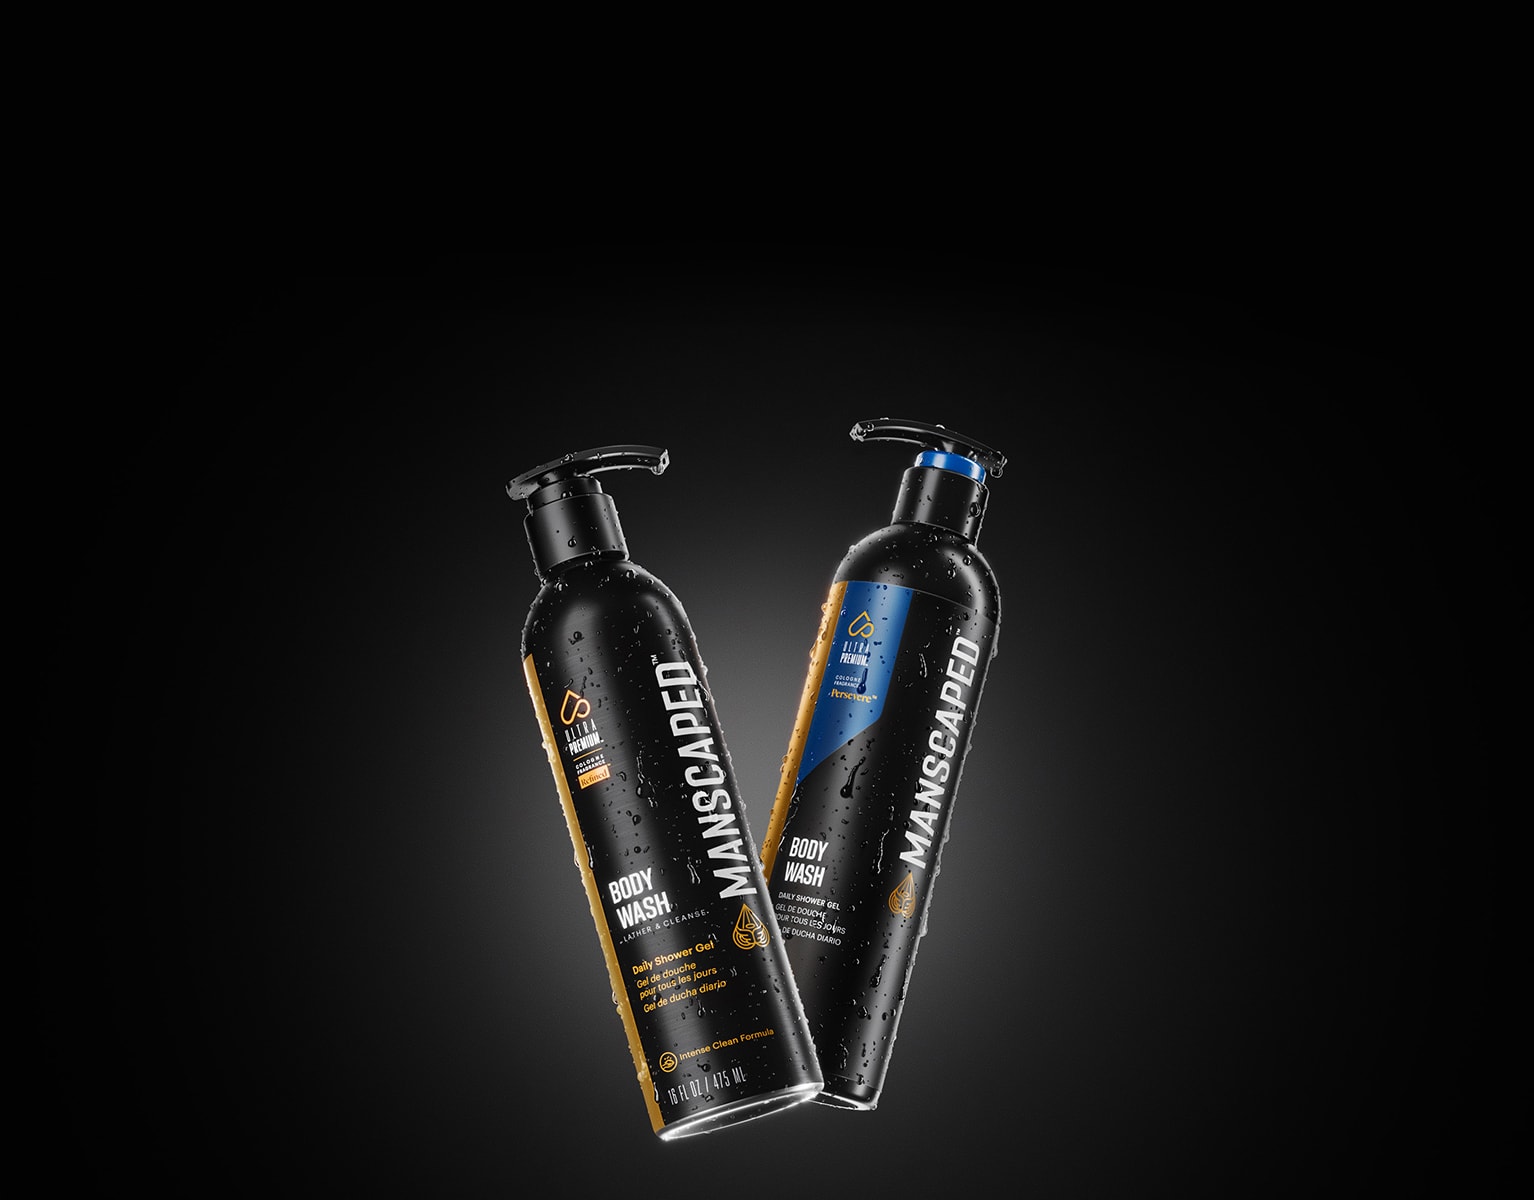 Side-by-side showcase of the two UltraPremium Body Wash scents